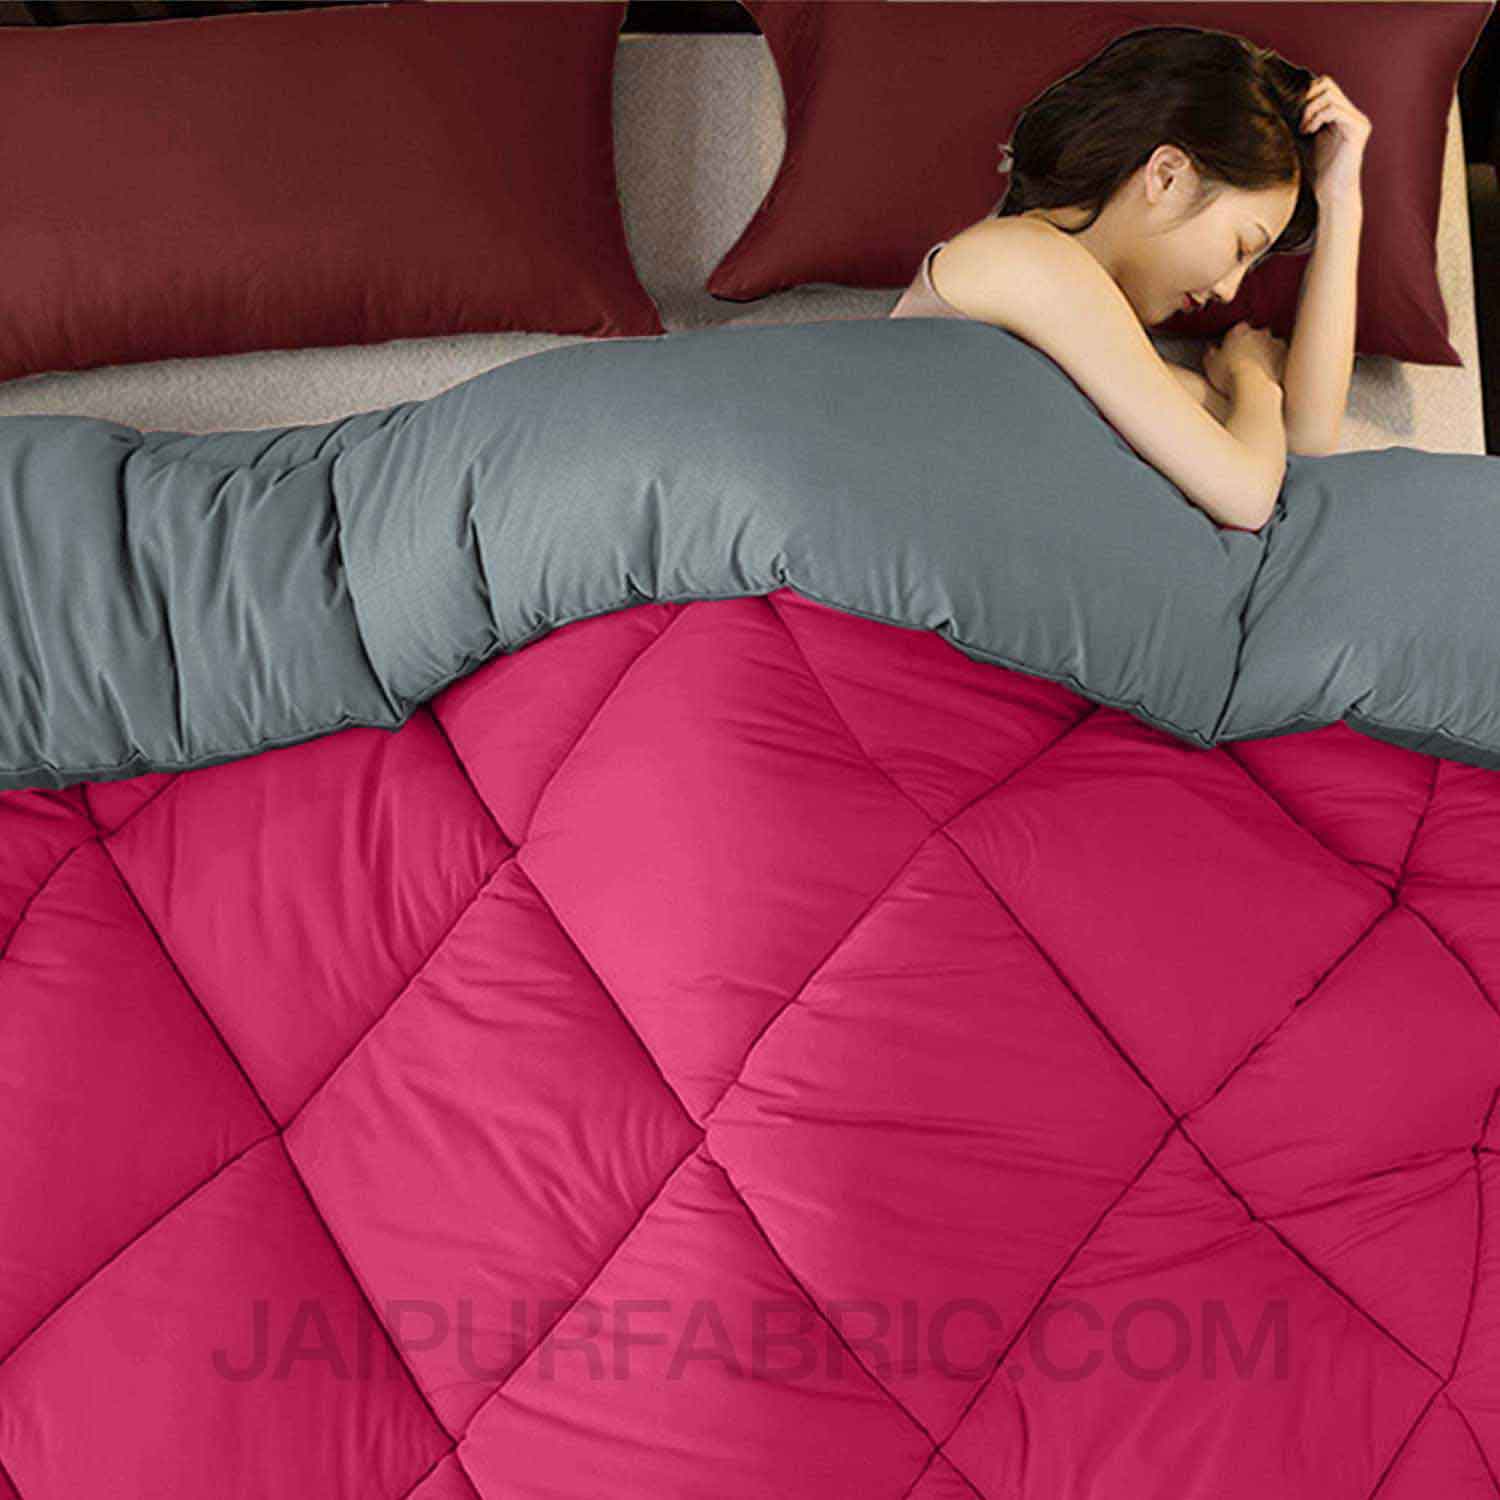 Red-Grey  Double Bed Comforter